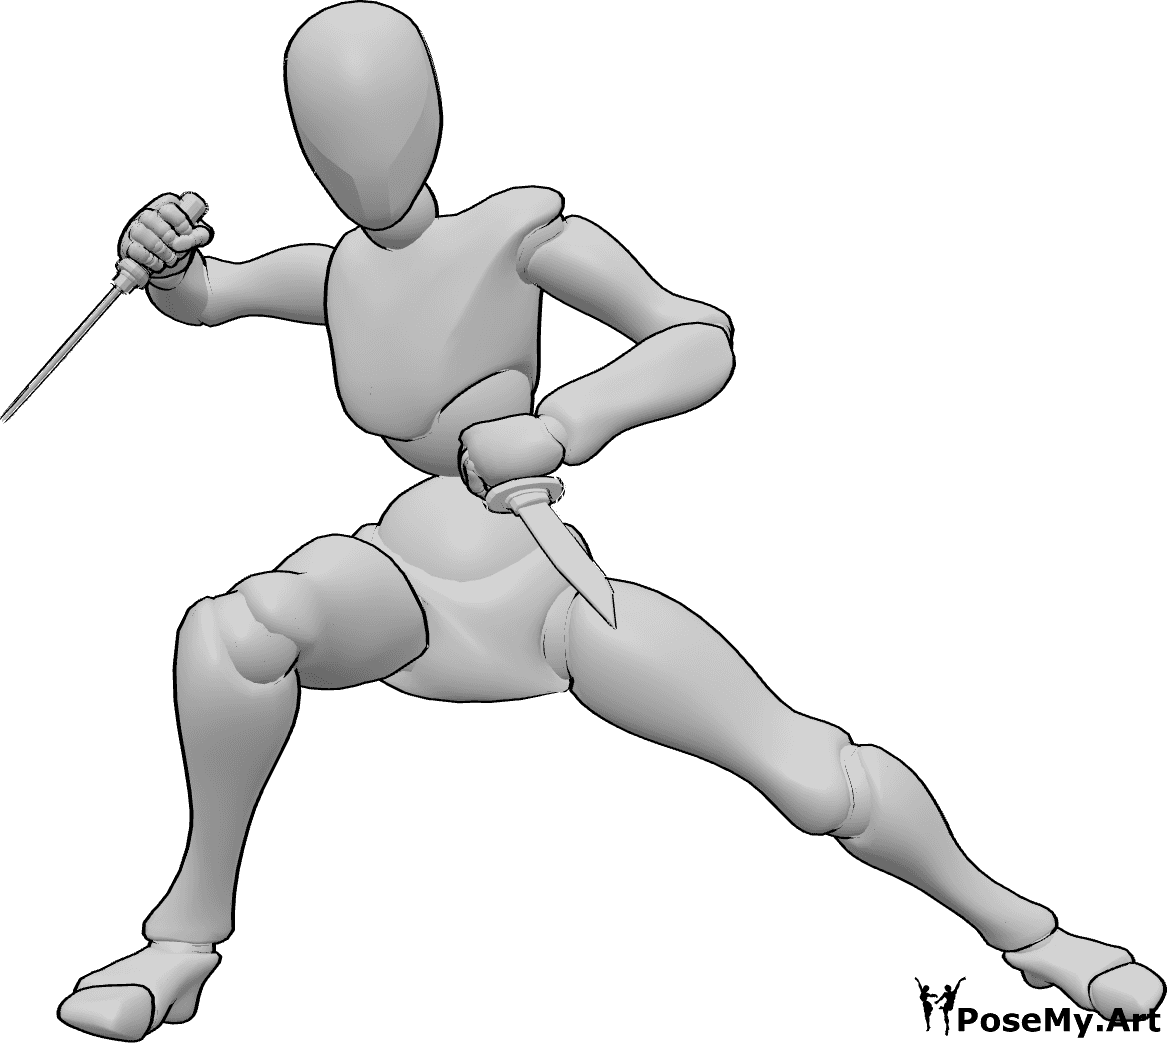 Pose Reference- Dagger fighting stance pose - Female is holding two daggers and is ready to fight, knife fighting stance pose